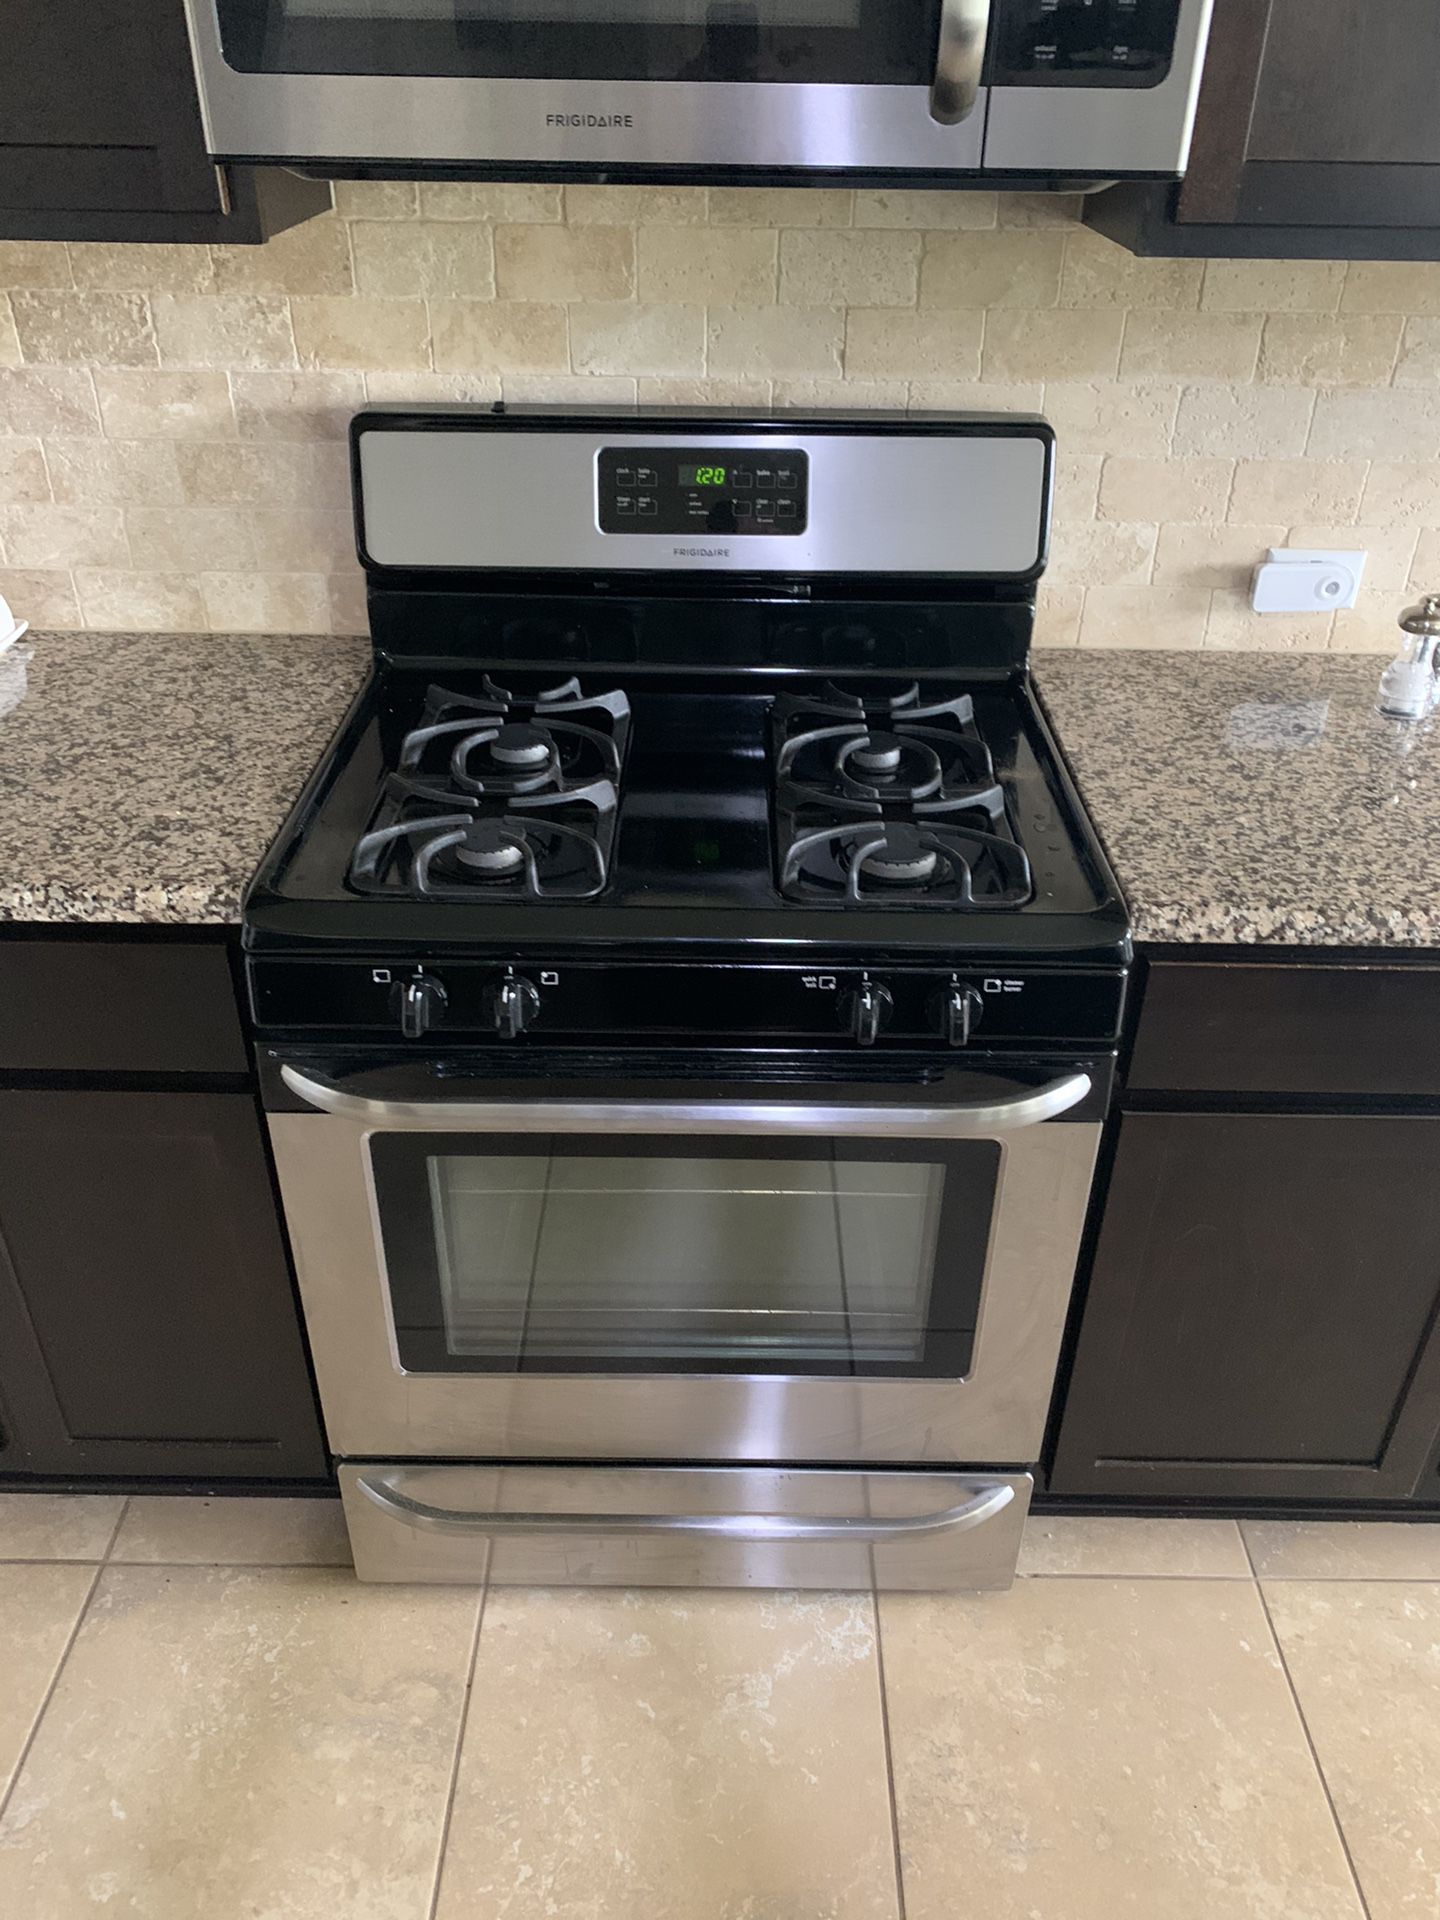 Frigidaire stove, dishwasher & FREE microwave $800 for ALL